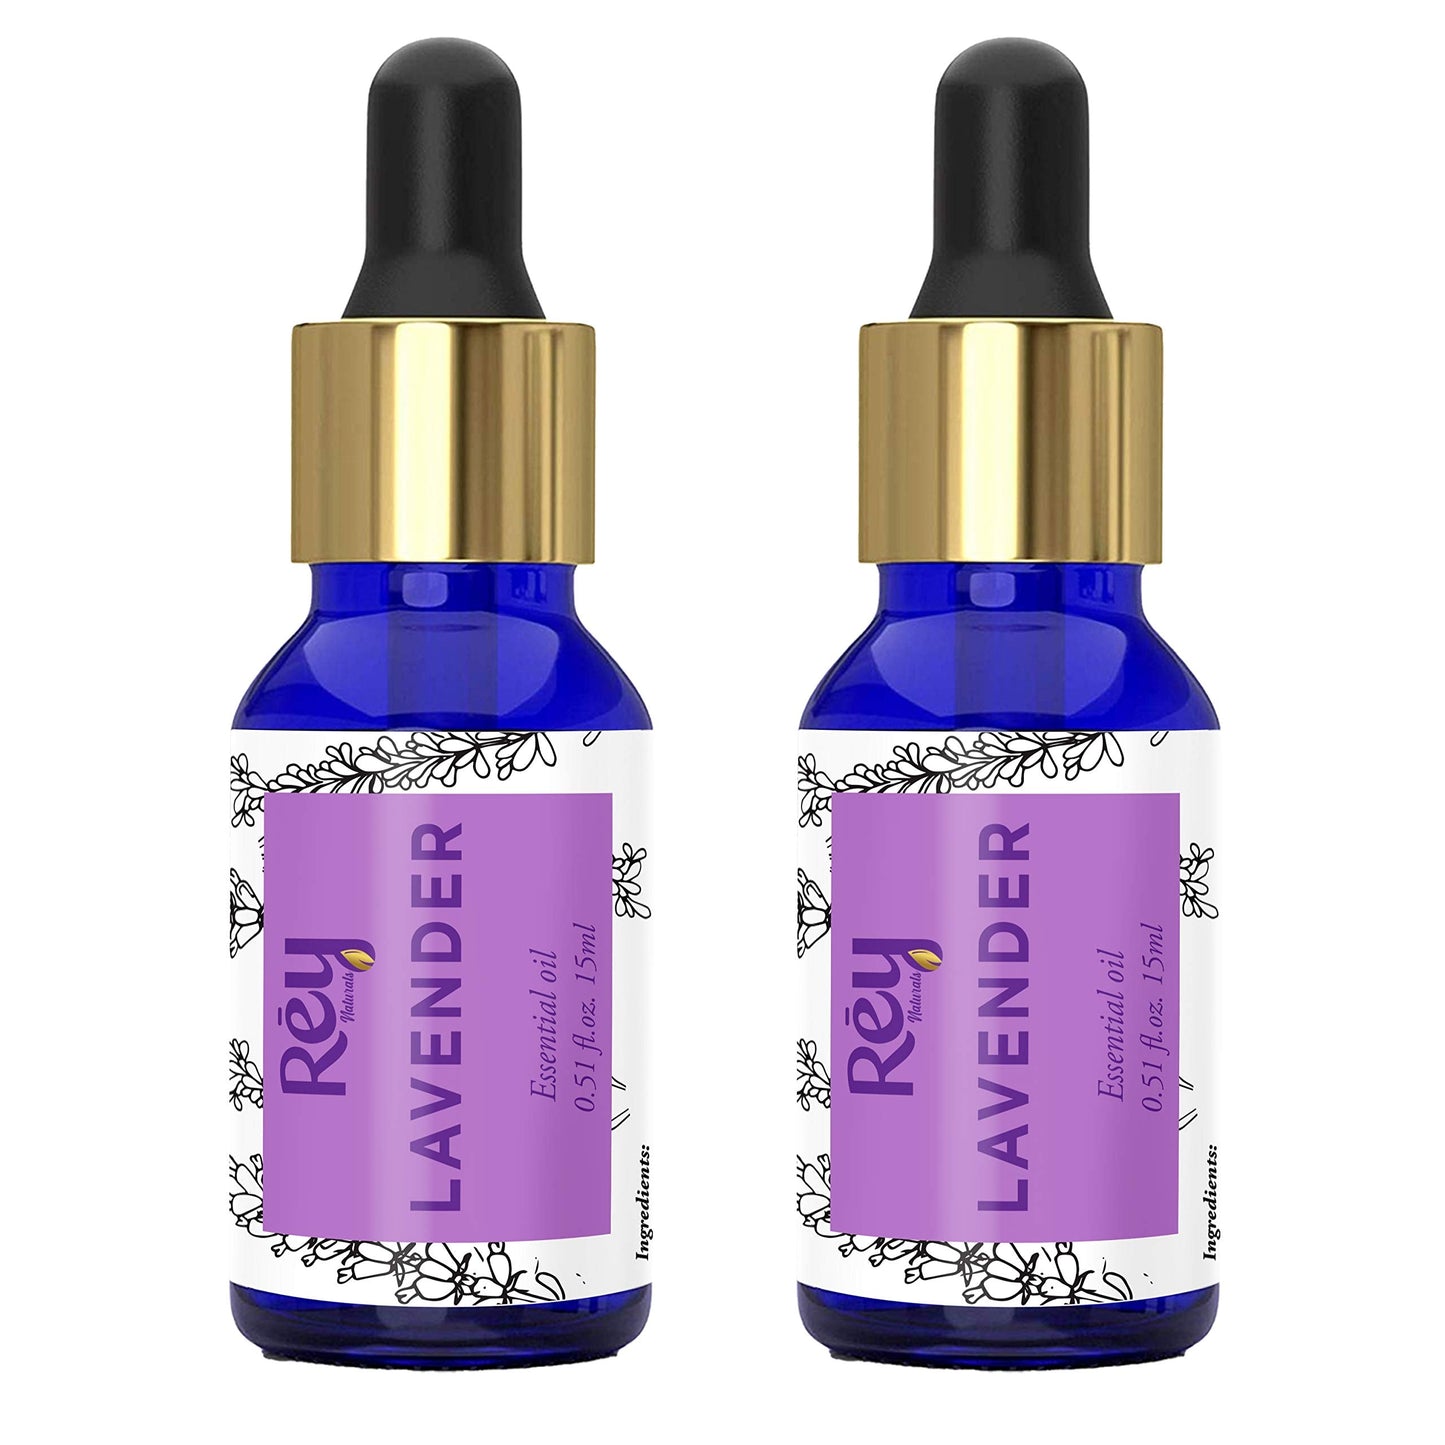 Rey Naturals Lavender Essential Oil - Pure 100 Natural - Healthier Skin and Hair - Calming Bath or Massage for Restful Sleep - Diffuser-Ready for Aromatherapy - 30 ml 15 ml x 2 super saver combo